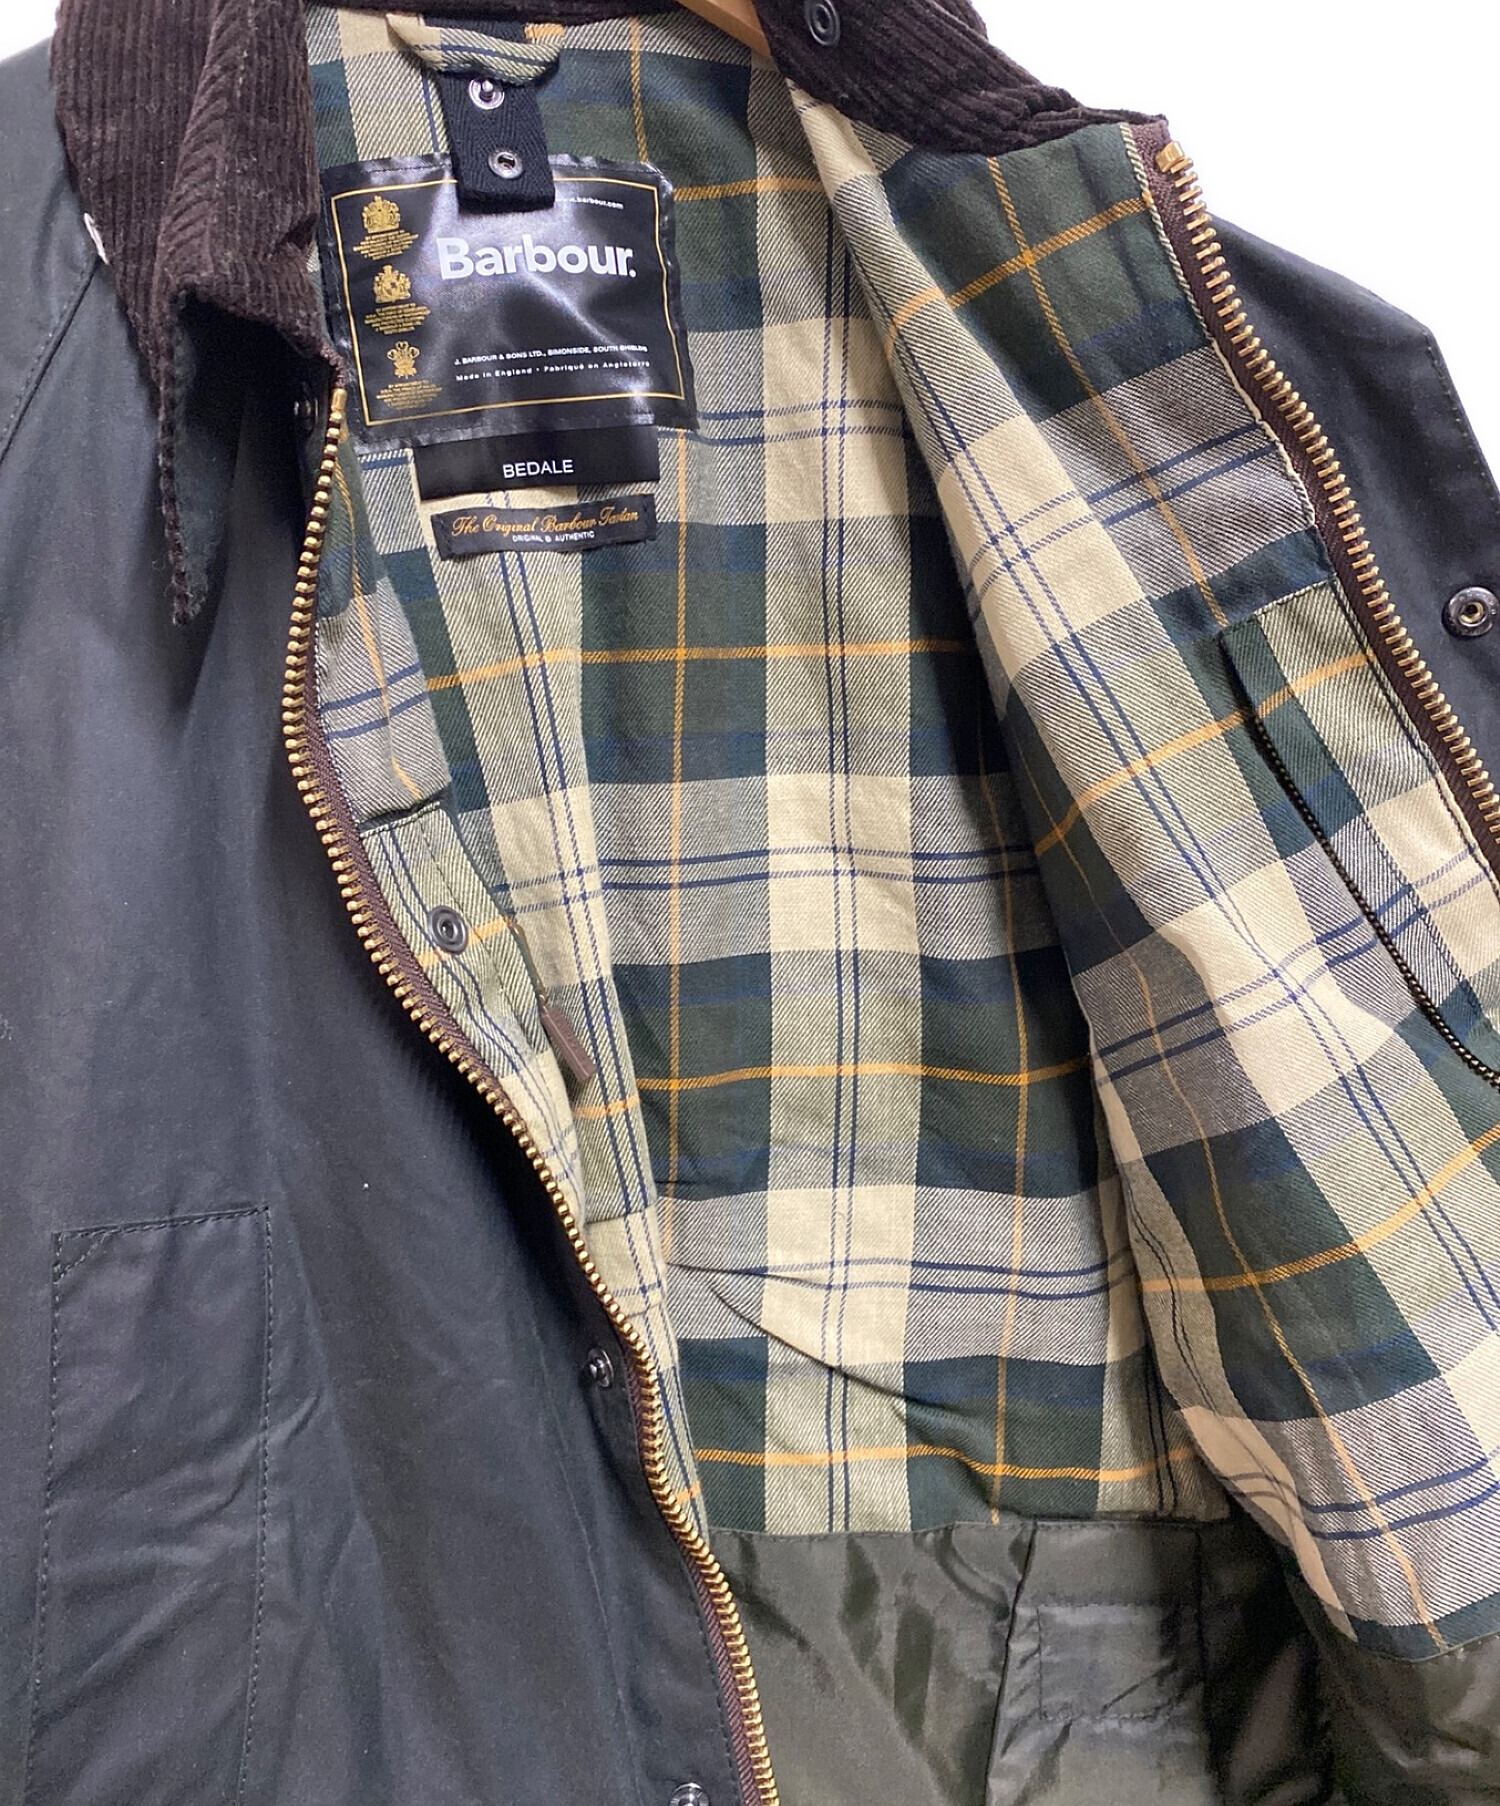 00's Barbour CLASSIC BEDALE c38 - ジャケット・アウター